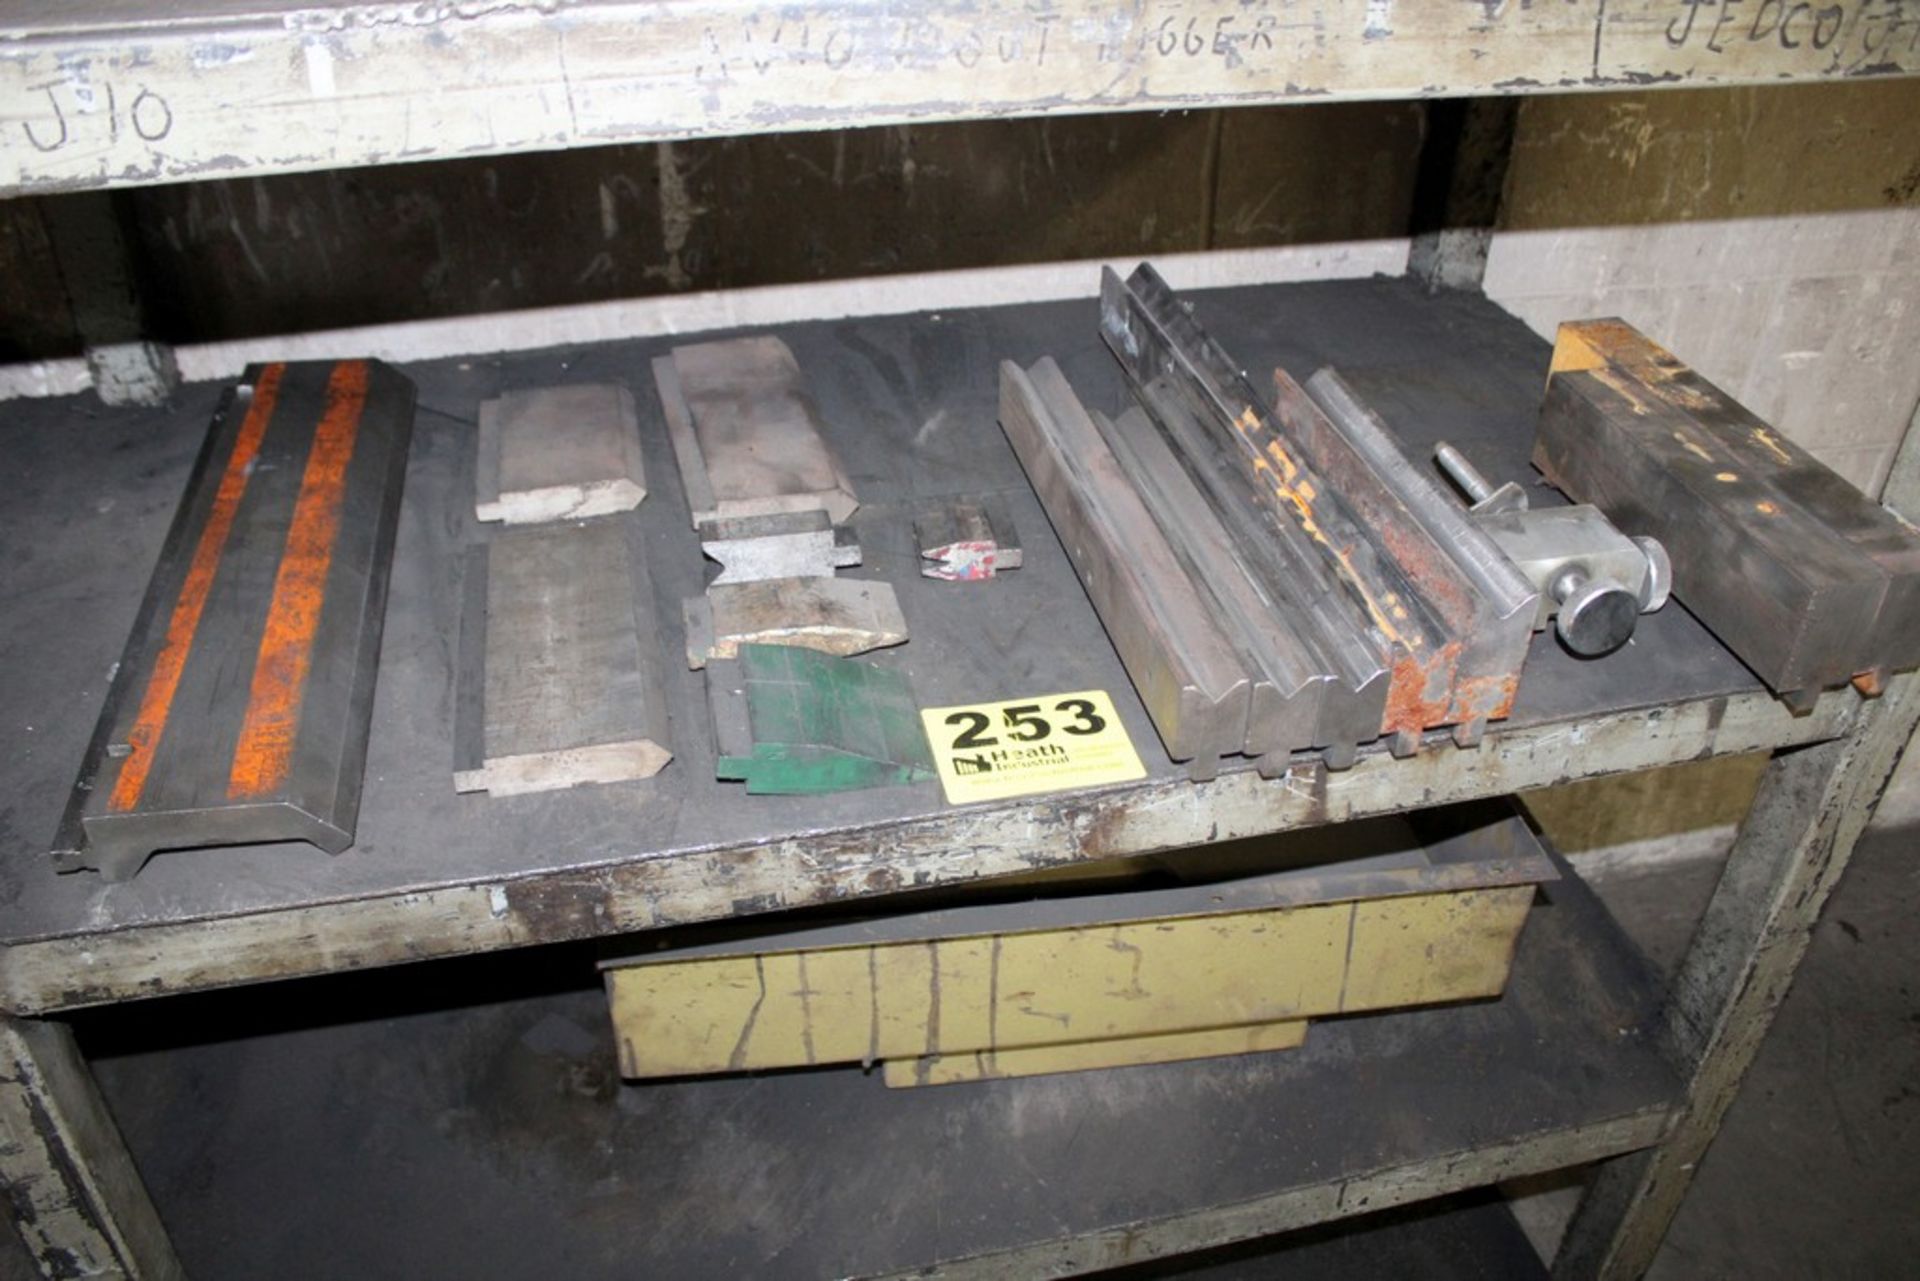 Press Brake Tooling: Assorted Press Brake Tooling Sections - Punches & Dies on Shelf